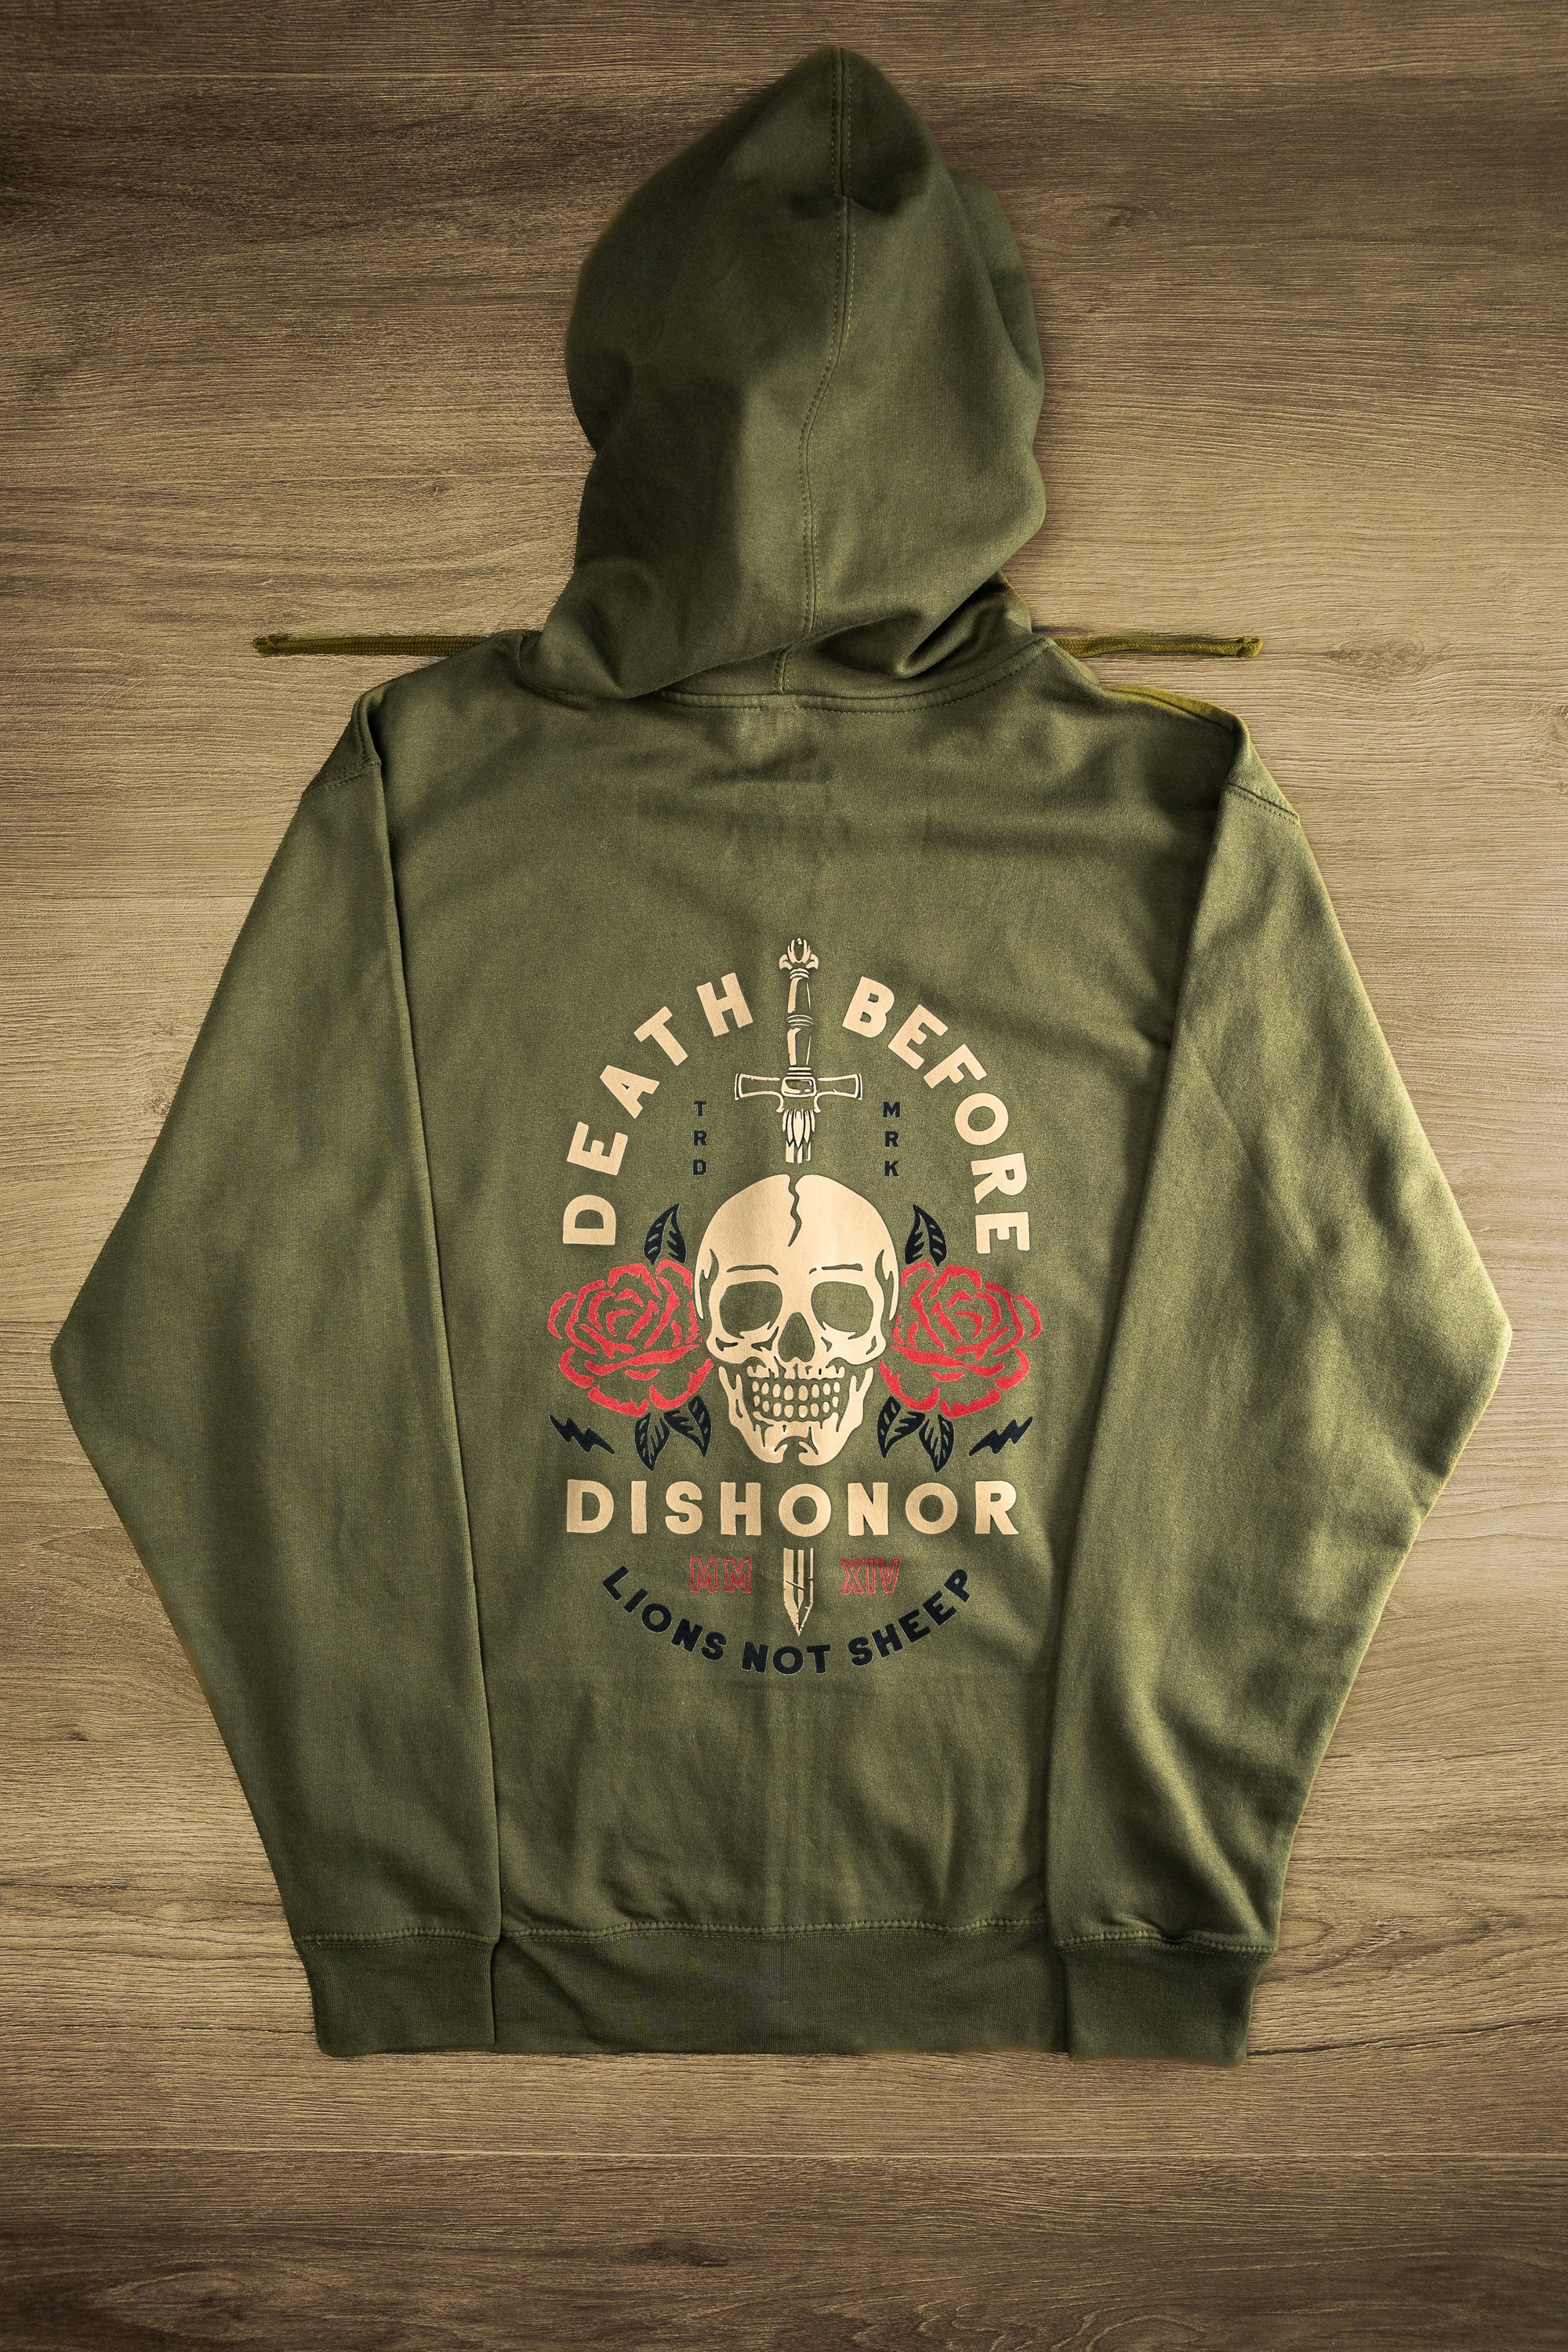 Lions Not Sheep "Death Before Dishonor" Unisex Zip-Up Hoodie - Lions Not Sheep ®